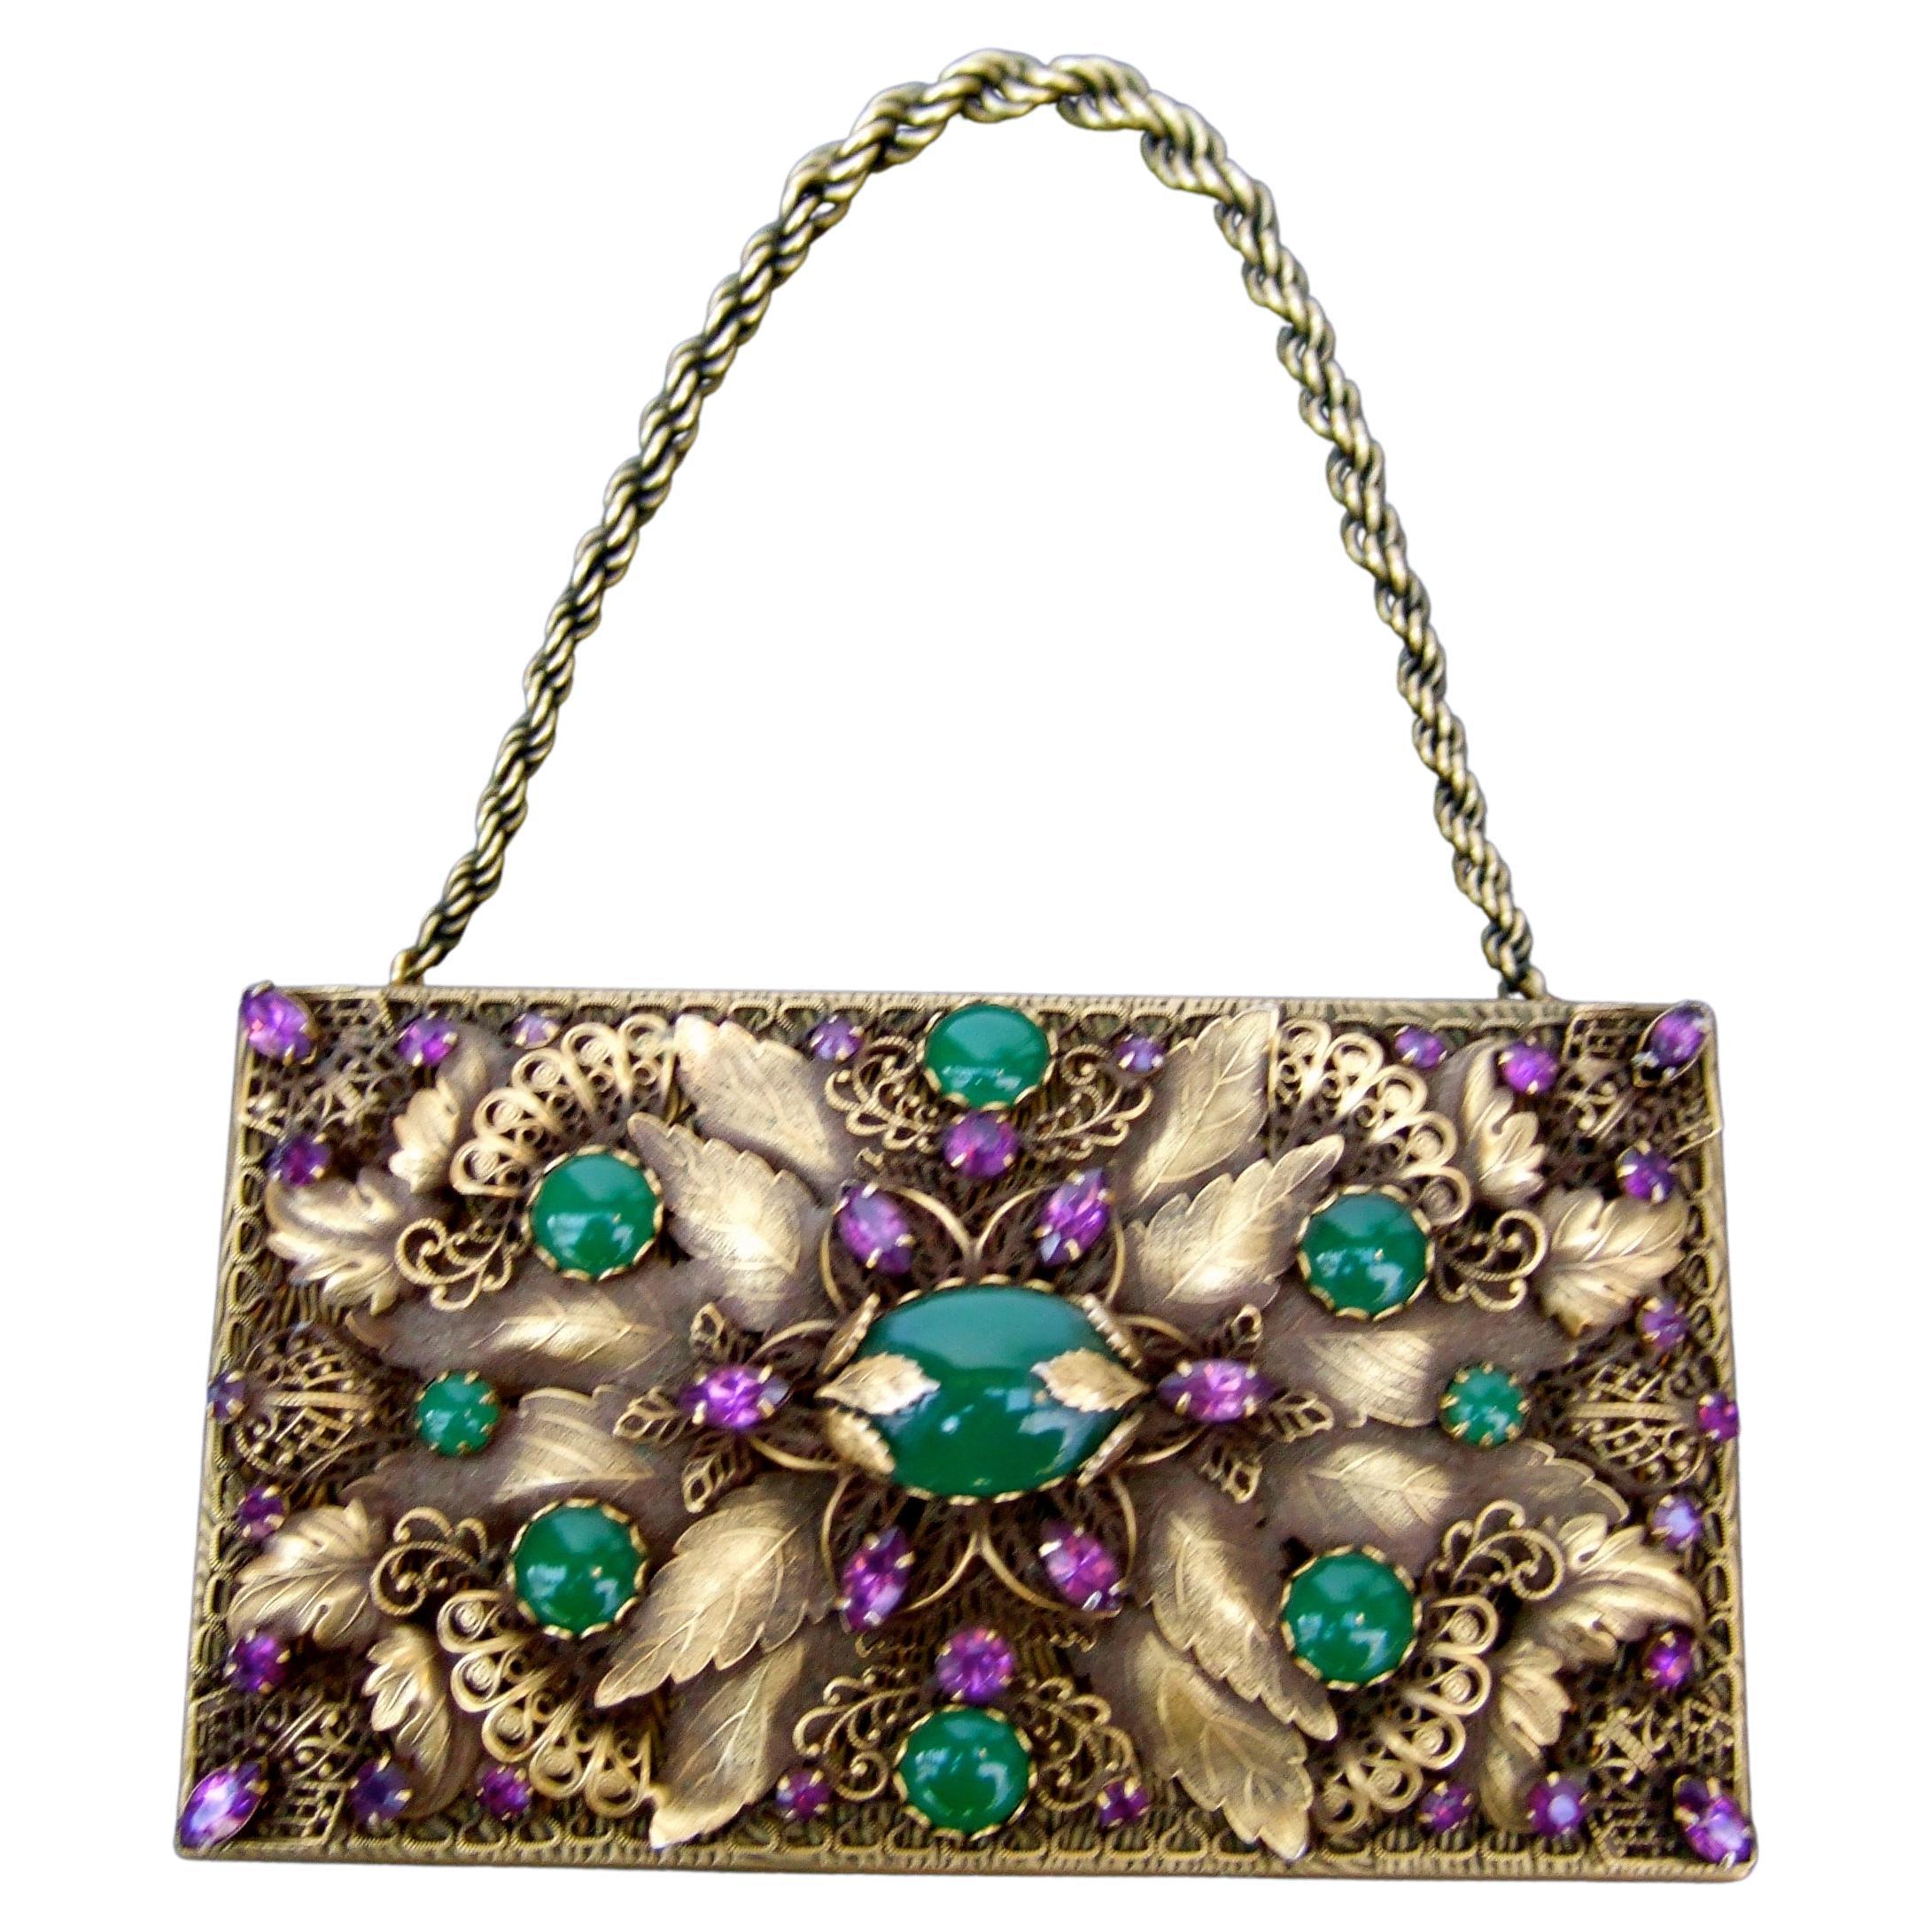 Opulent Jeweled Brass Metal Filigree Evening Bag - Compact Case by Evans c 1950s